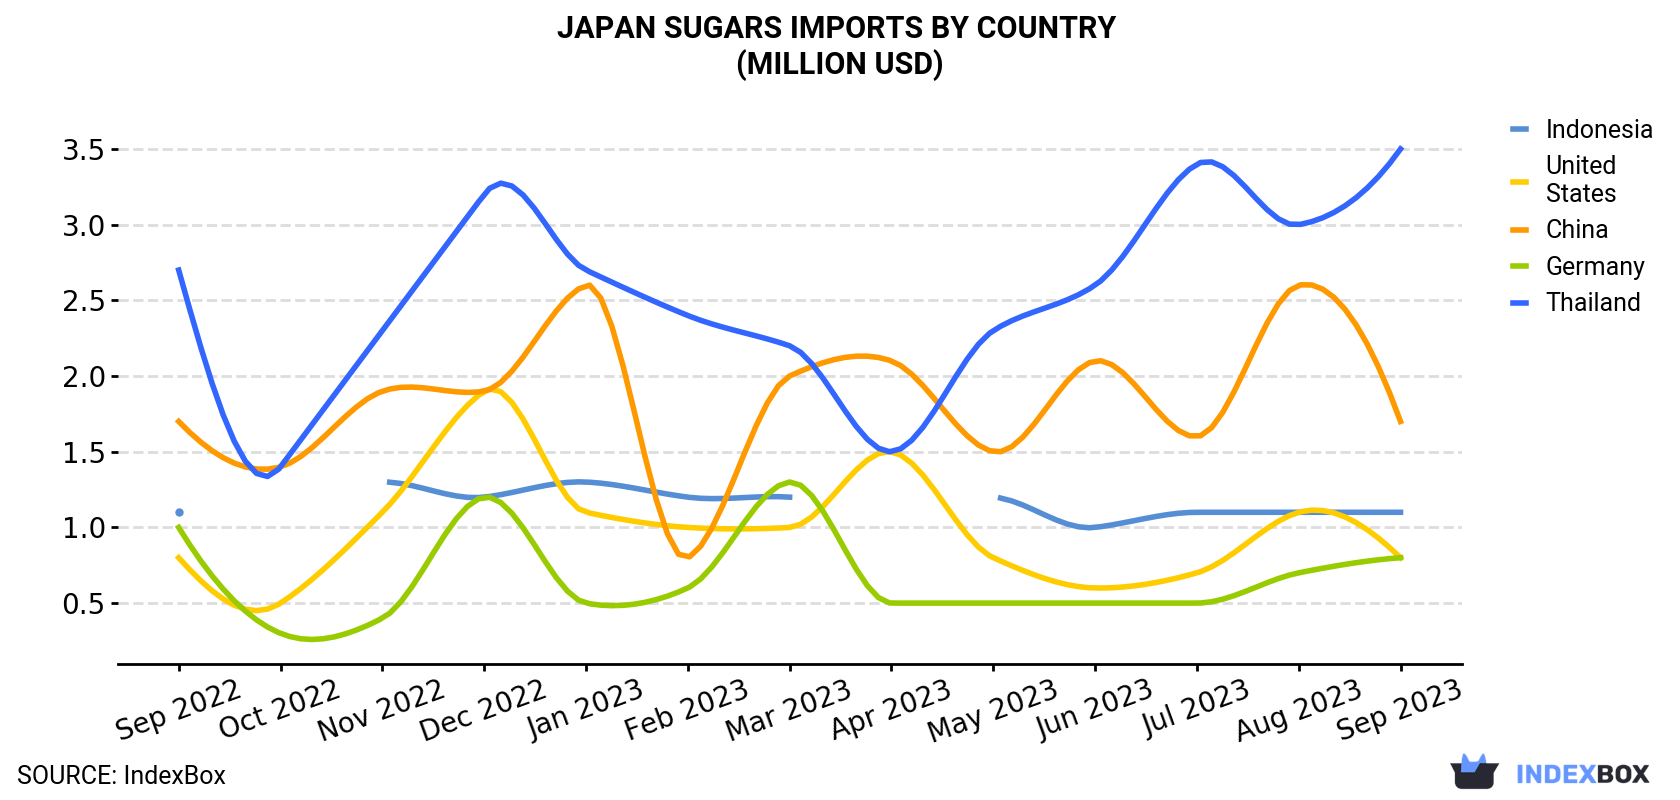 Japan Sugars Imports By Country (Million USD)